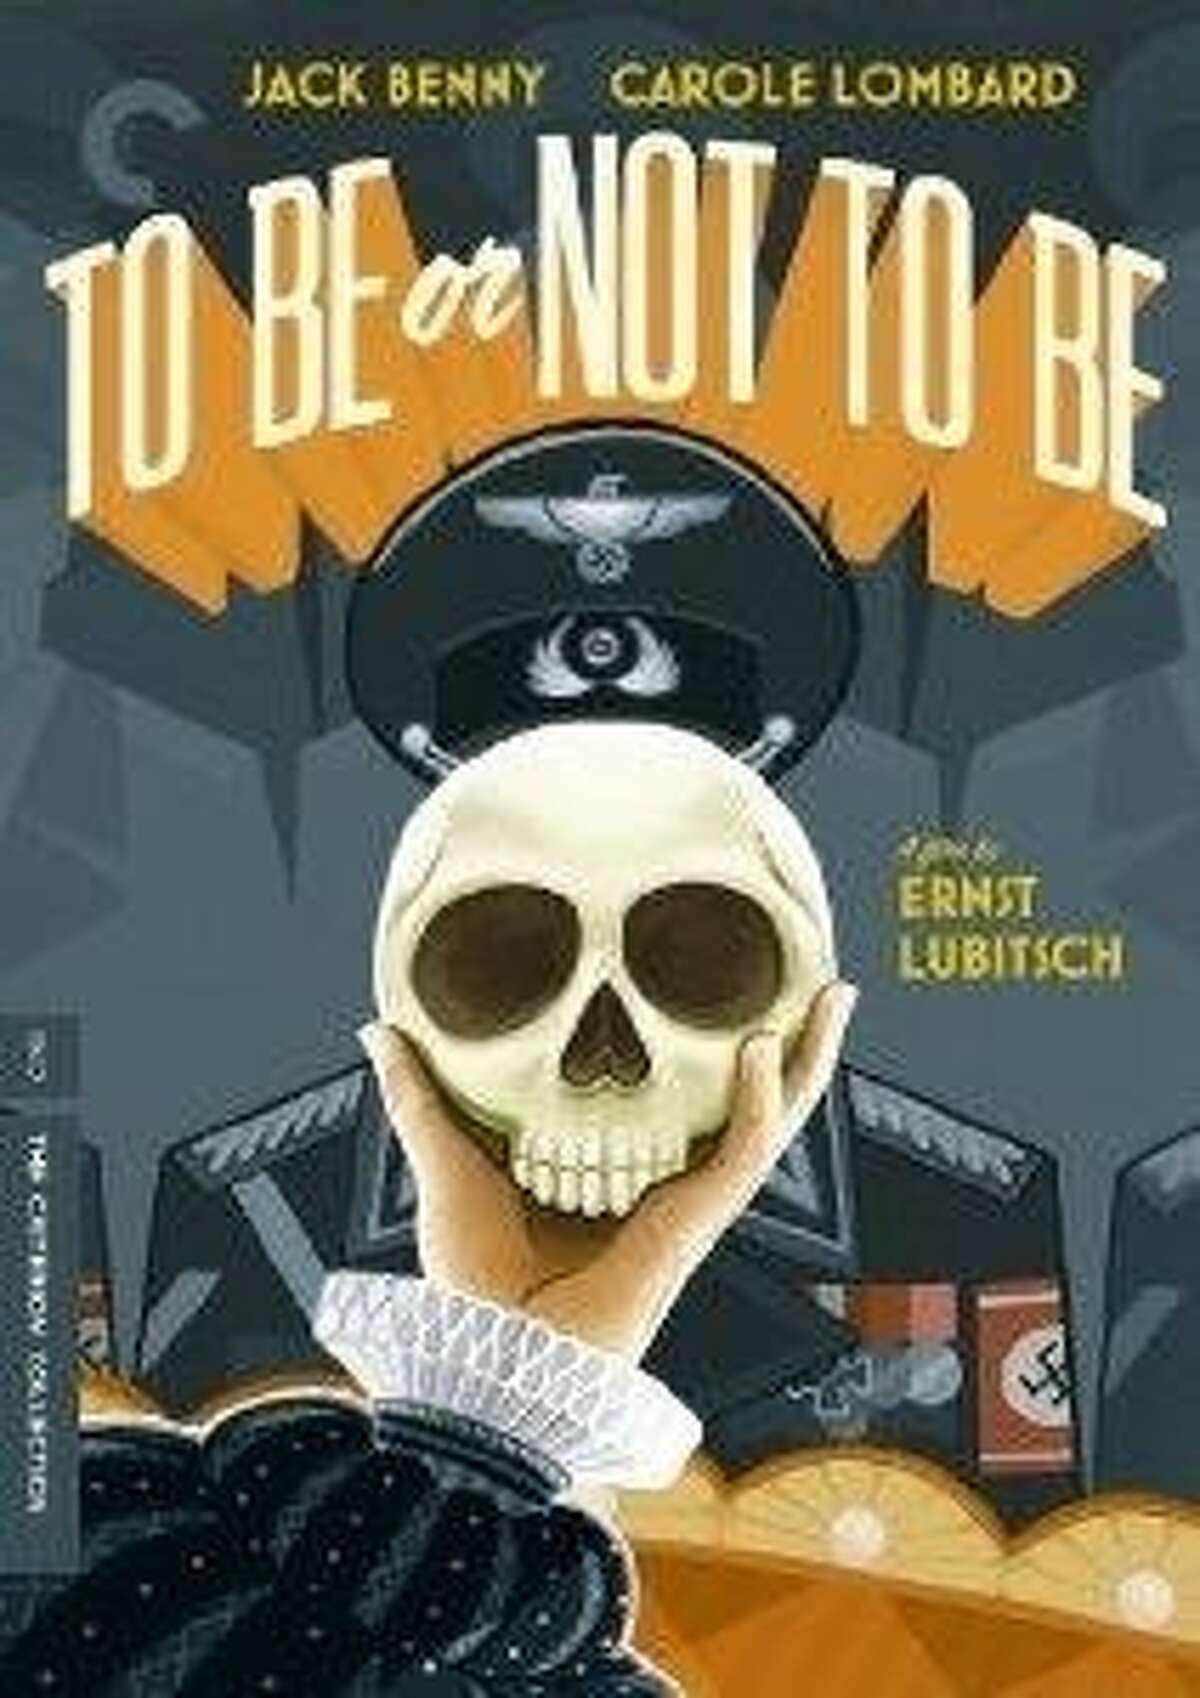 dvd cover: "To Be or Not to Be"